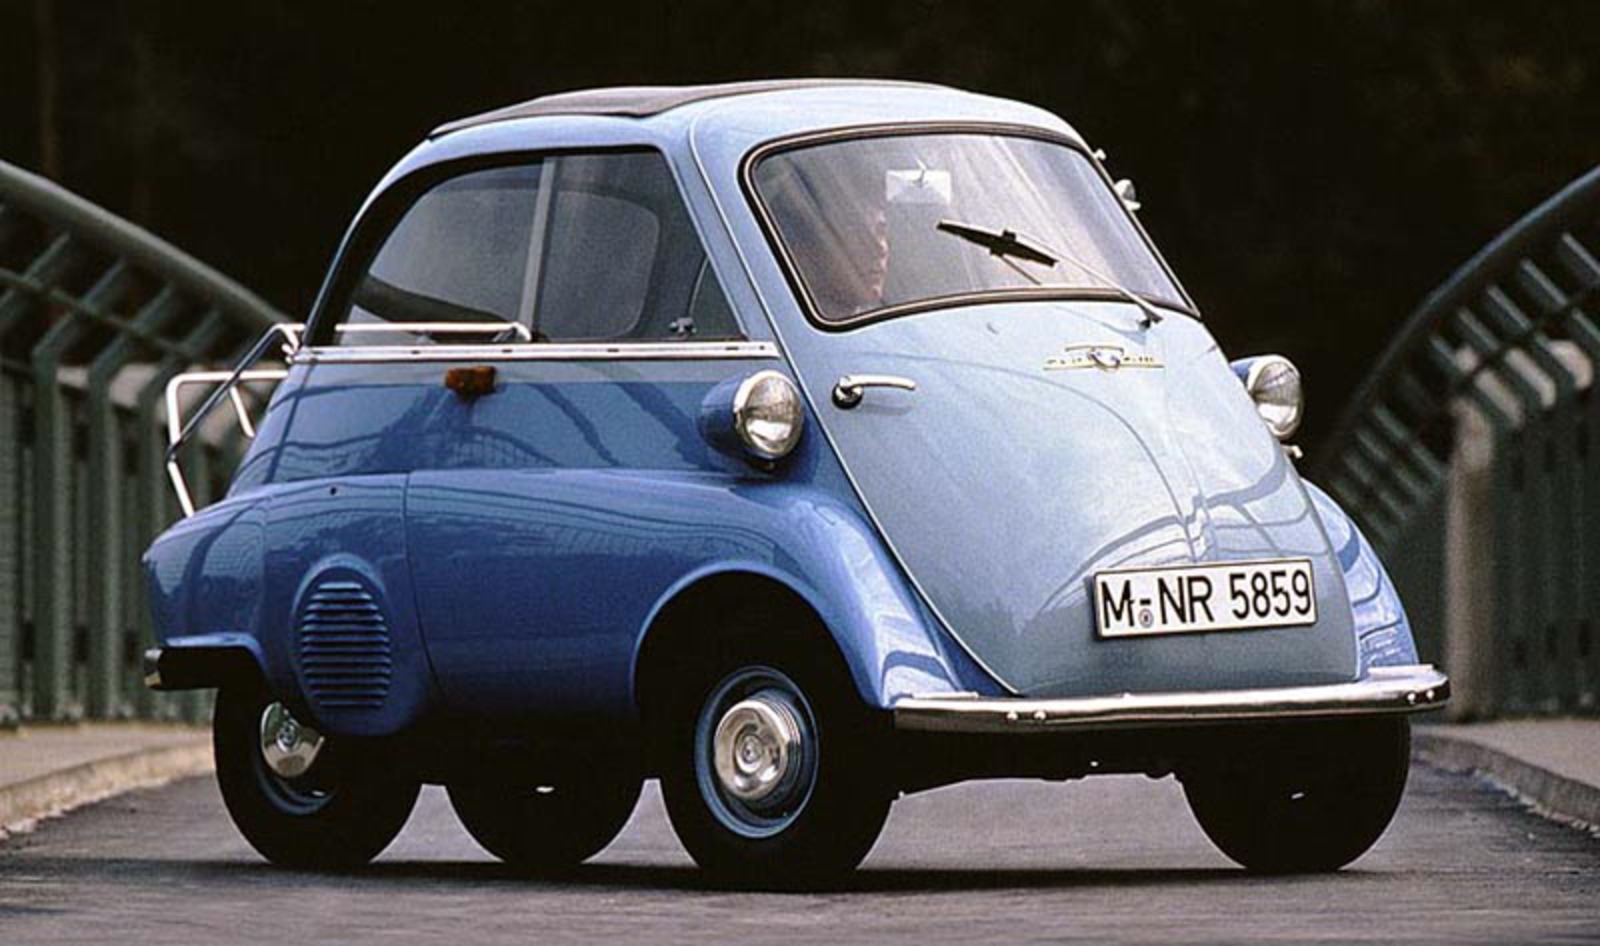 This is an Isetta. It was a car made by BMW. It is not a motorcycle.